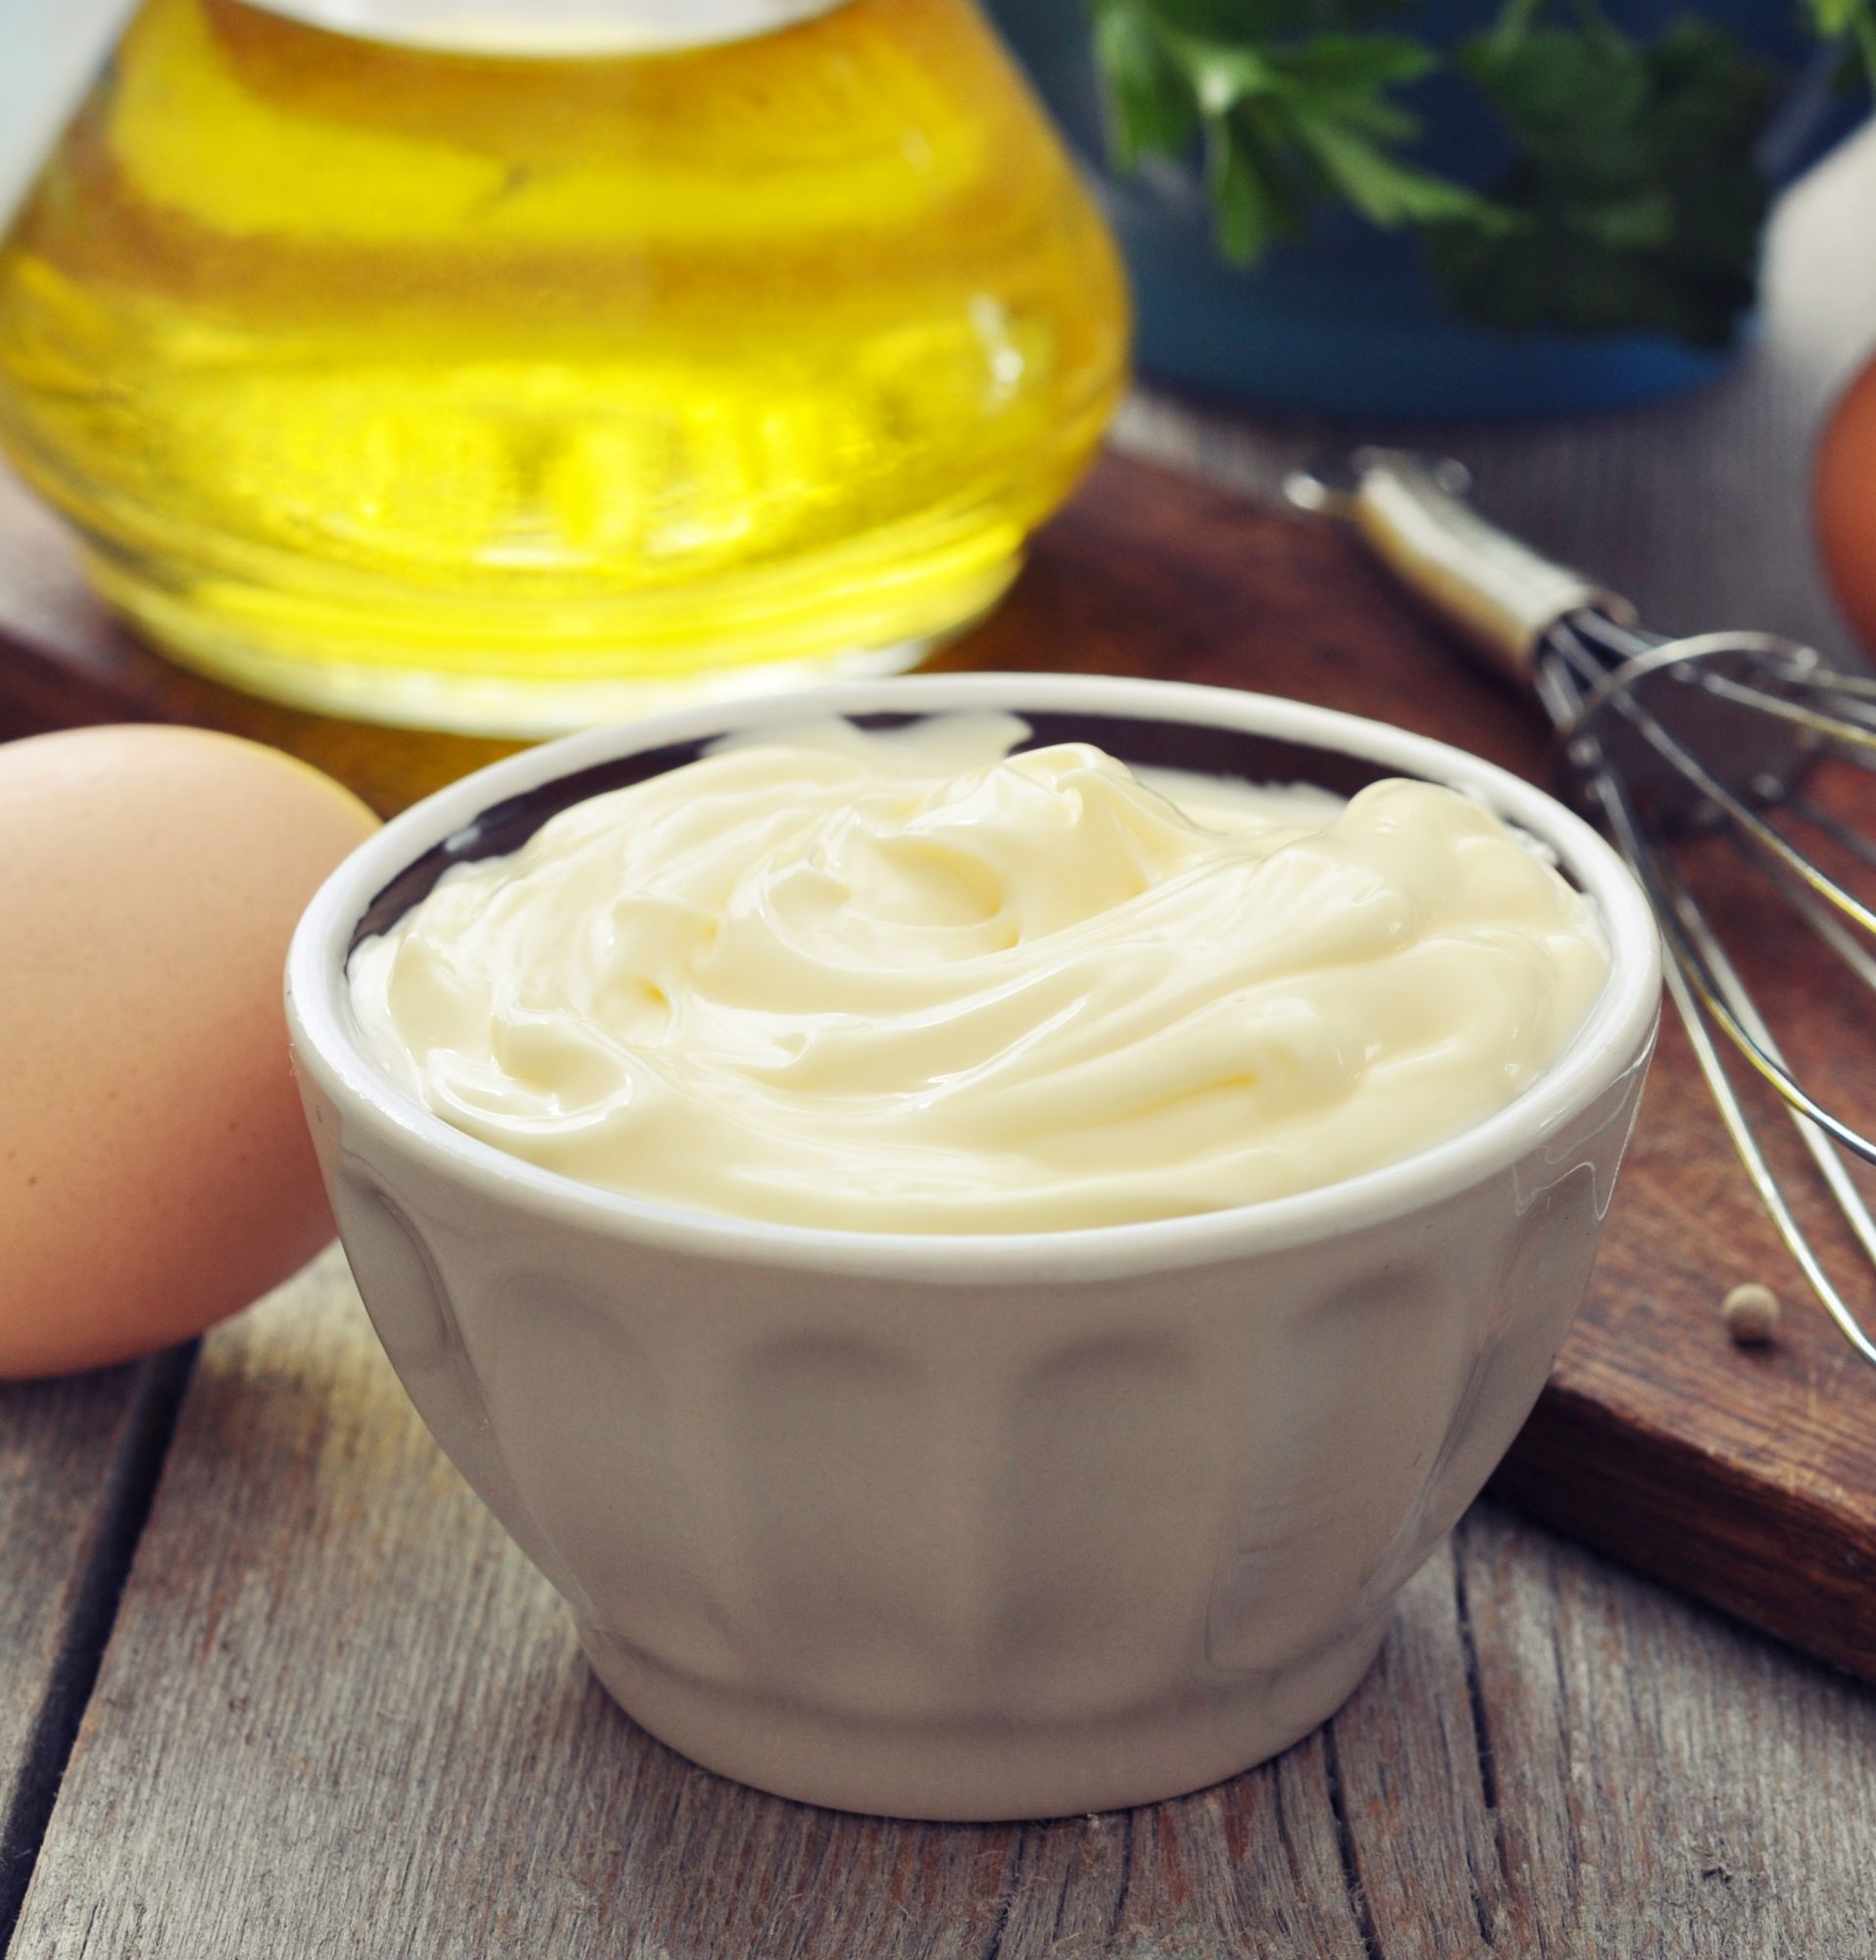 How to make homemade mayonnaise with olive oil